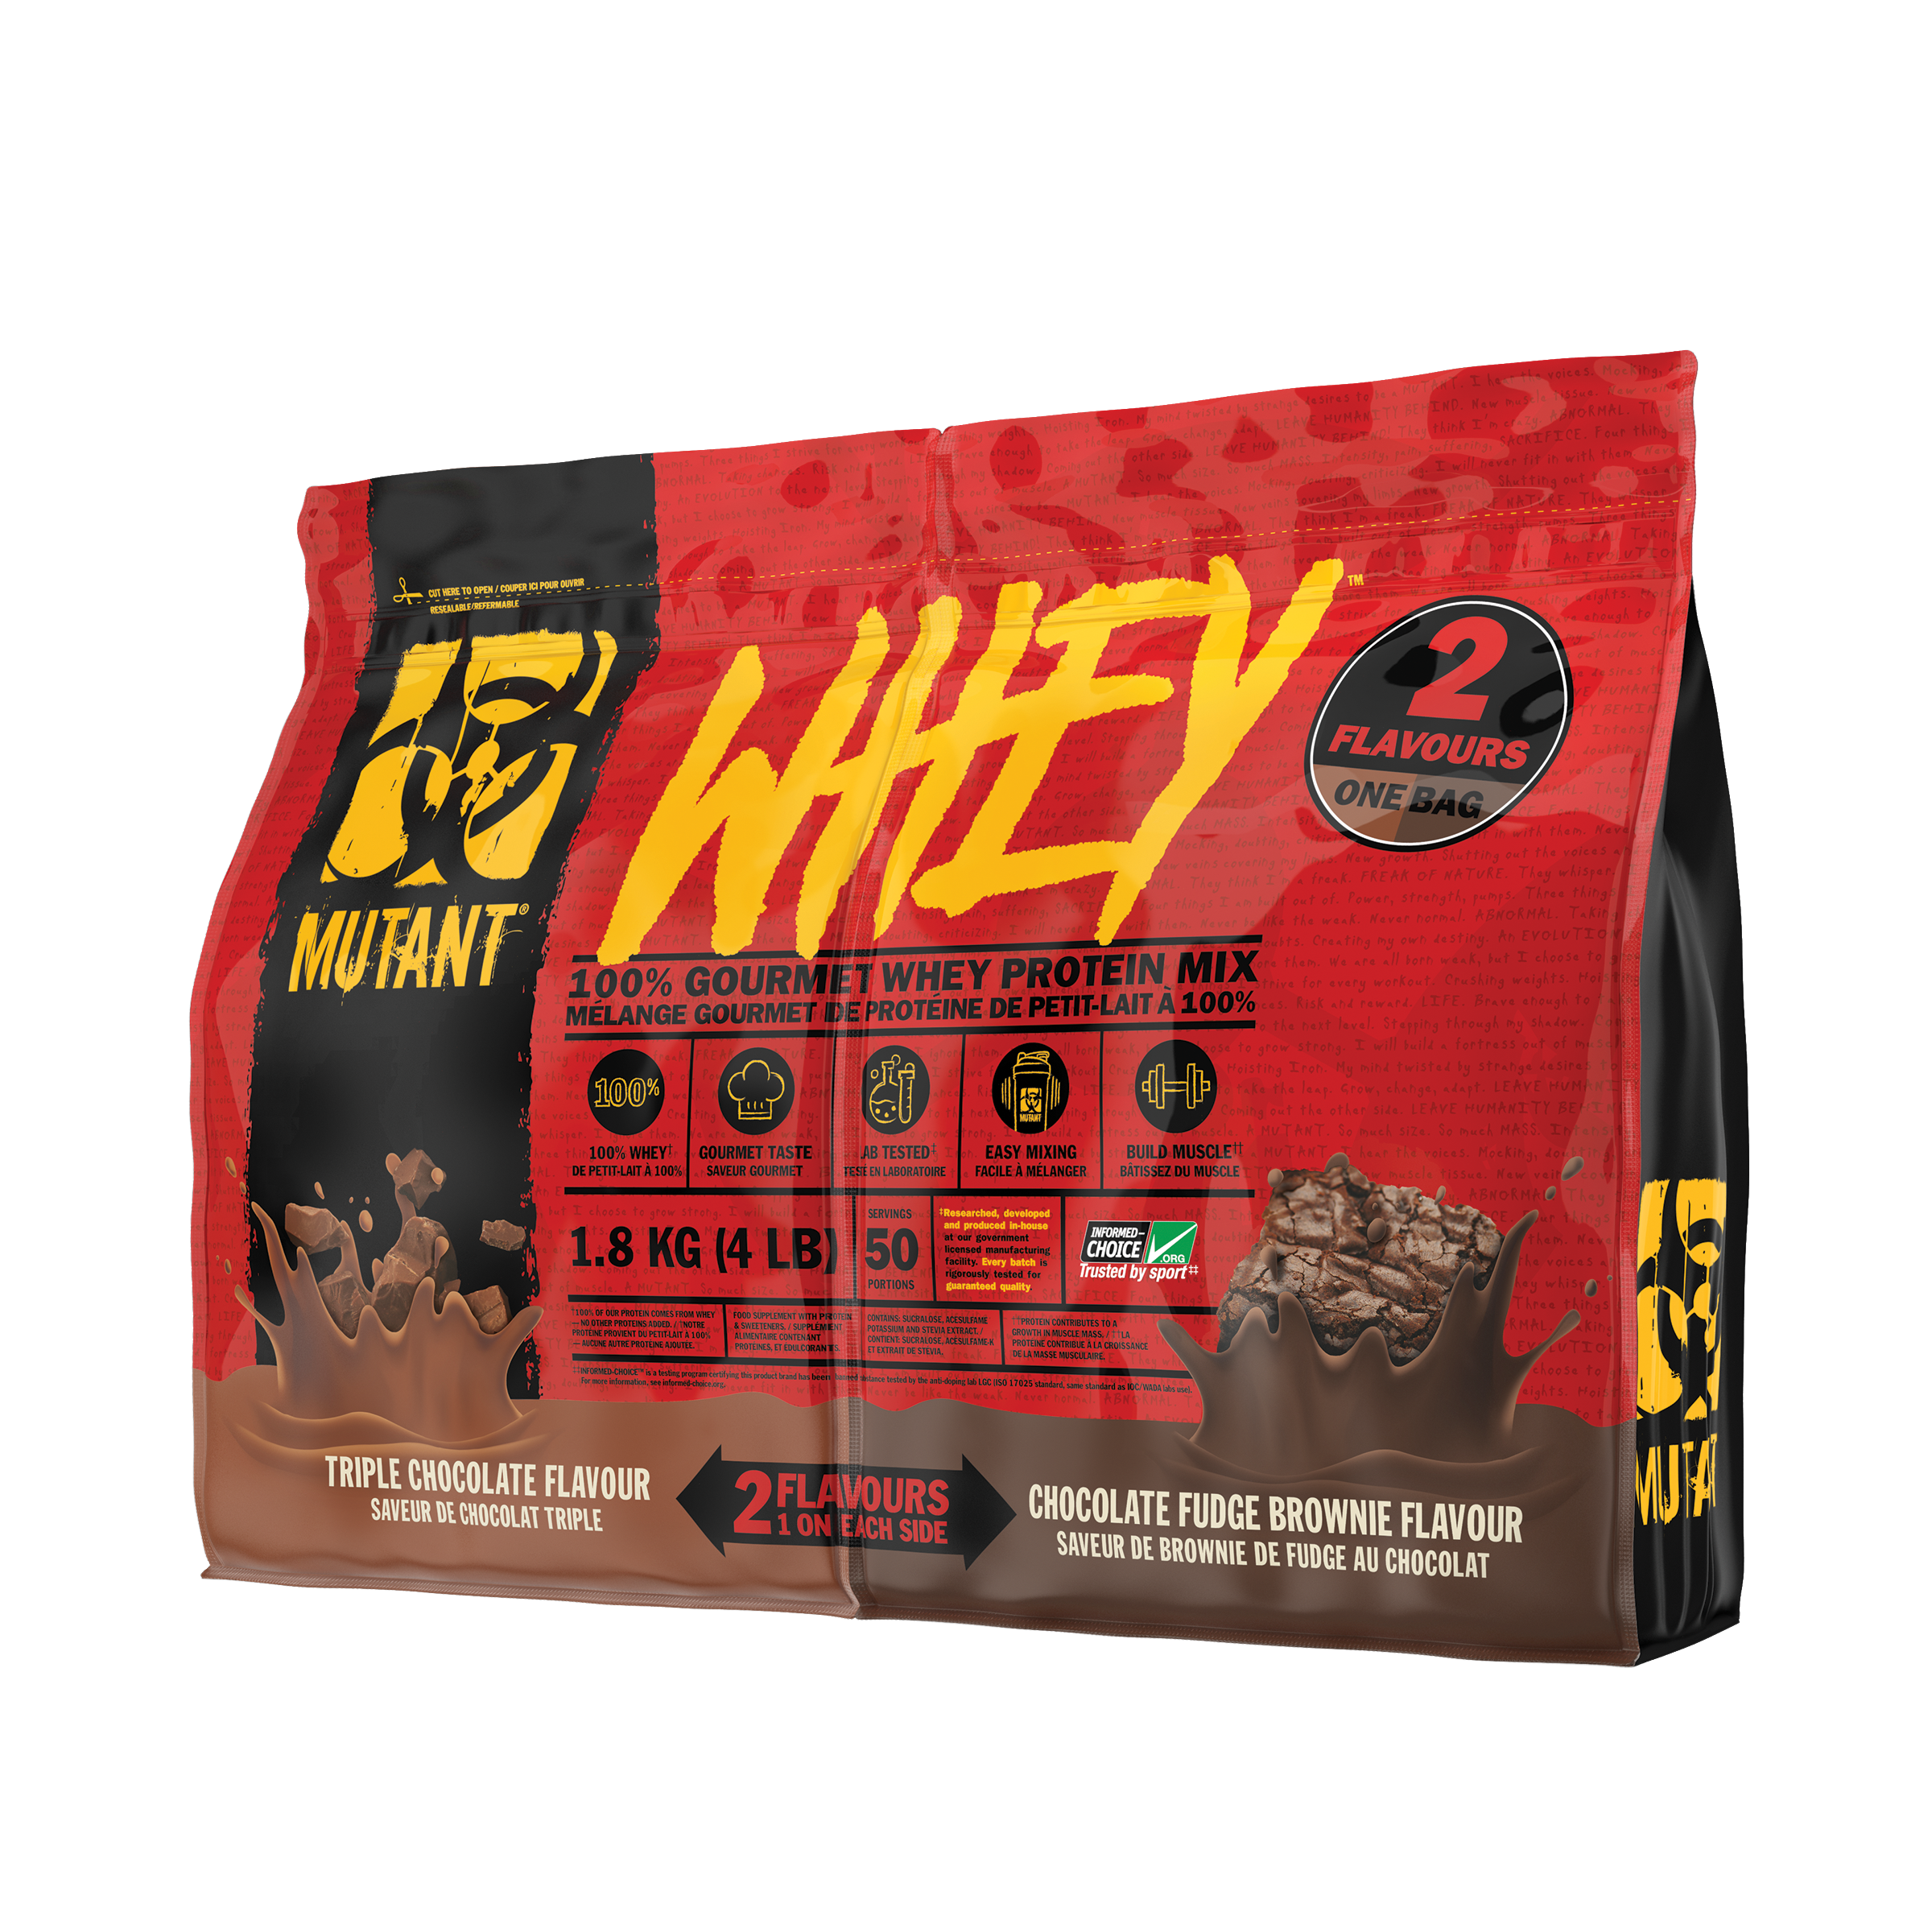 Mutant Whey Dual chamber (4lb/2 flavours in one bag) Whey Protein Chocolate Fudge & Brownie Mutant